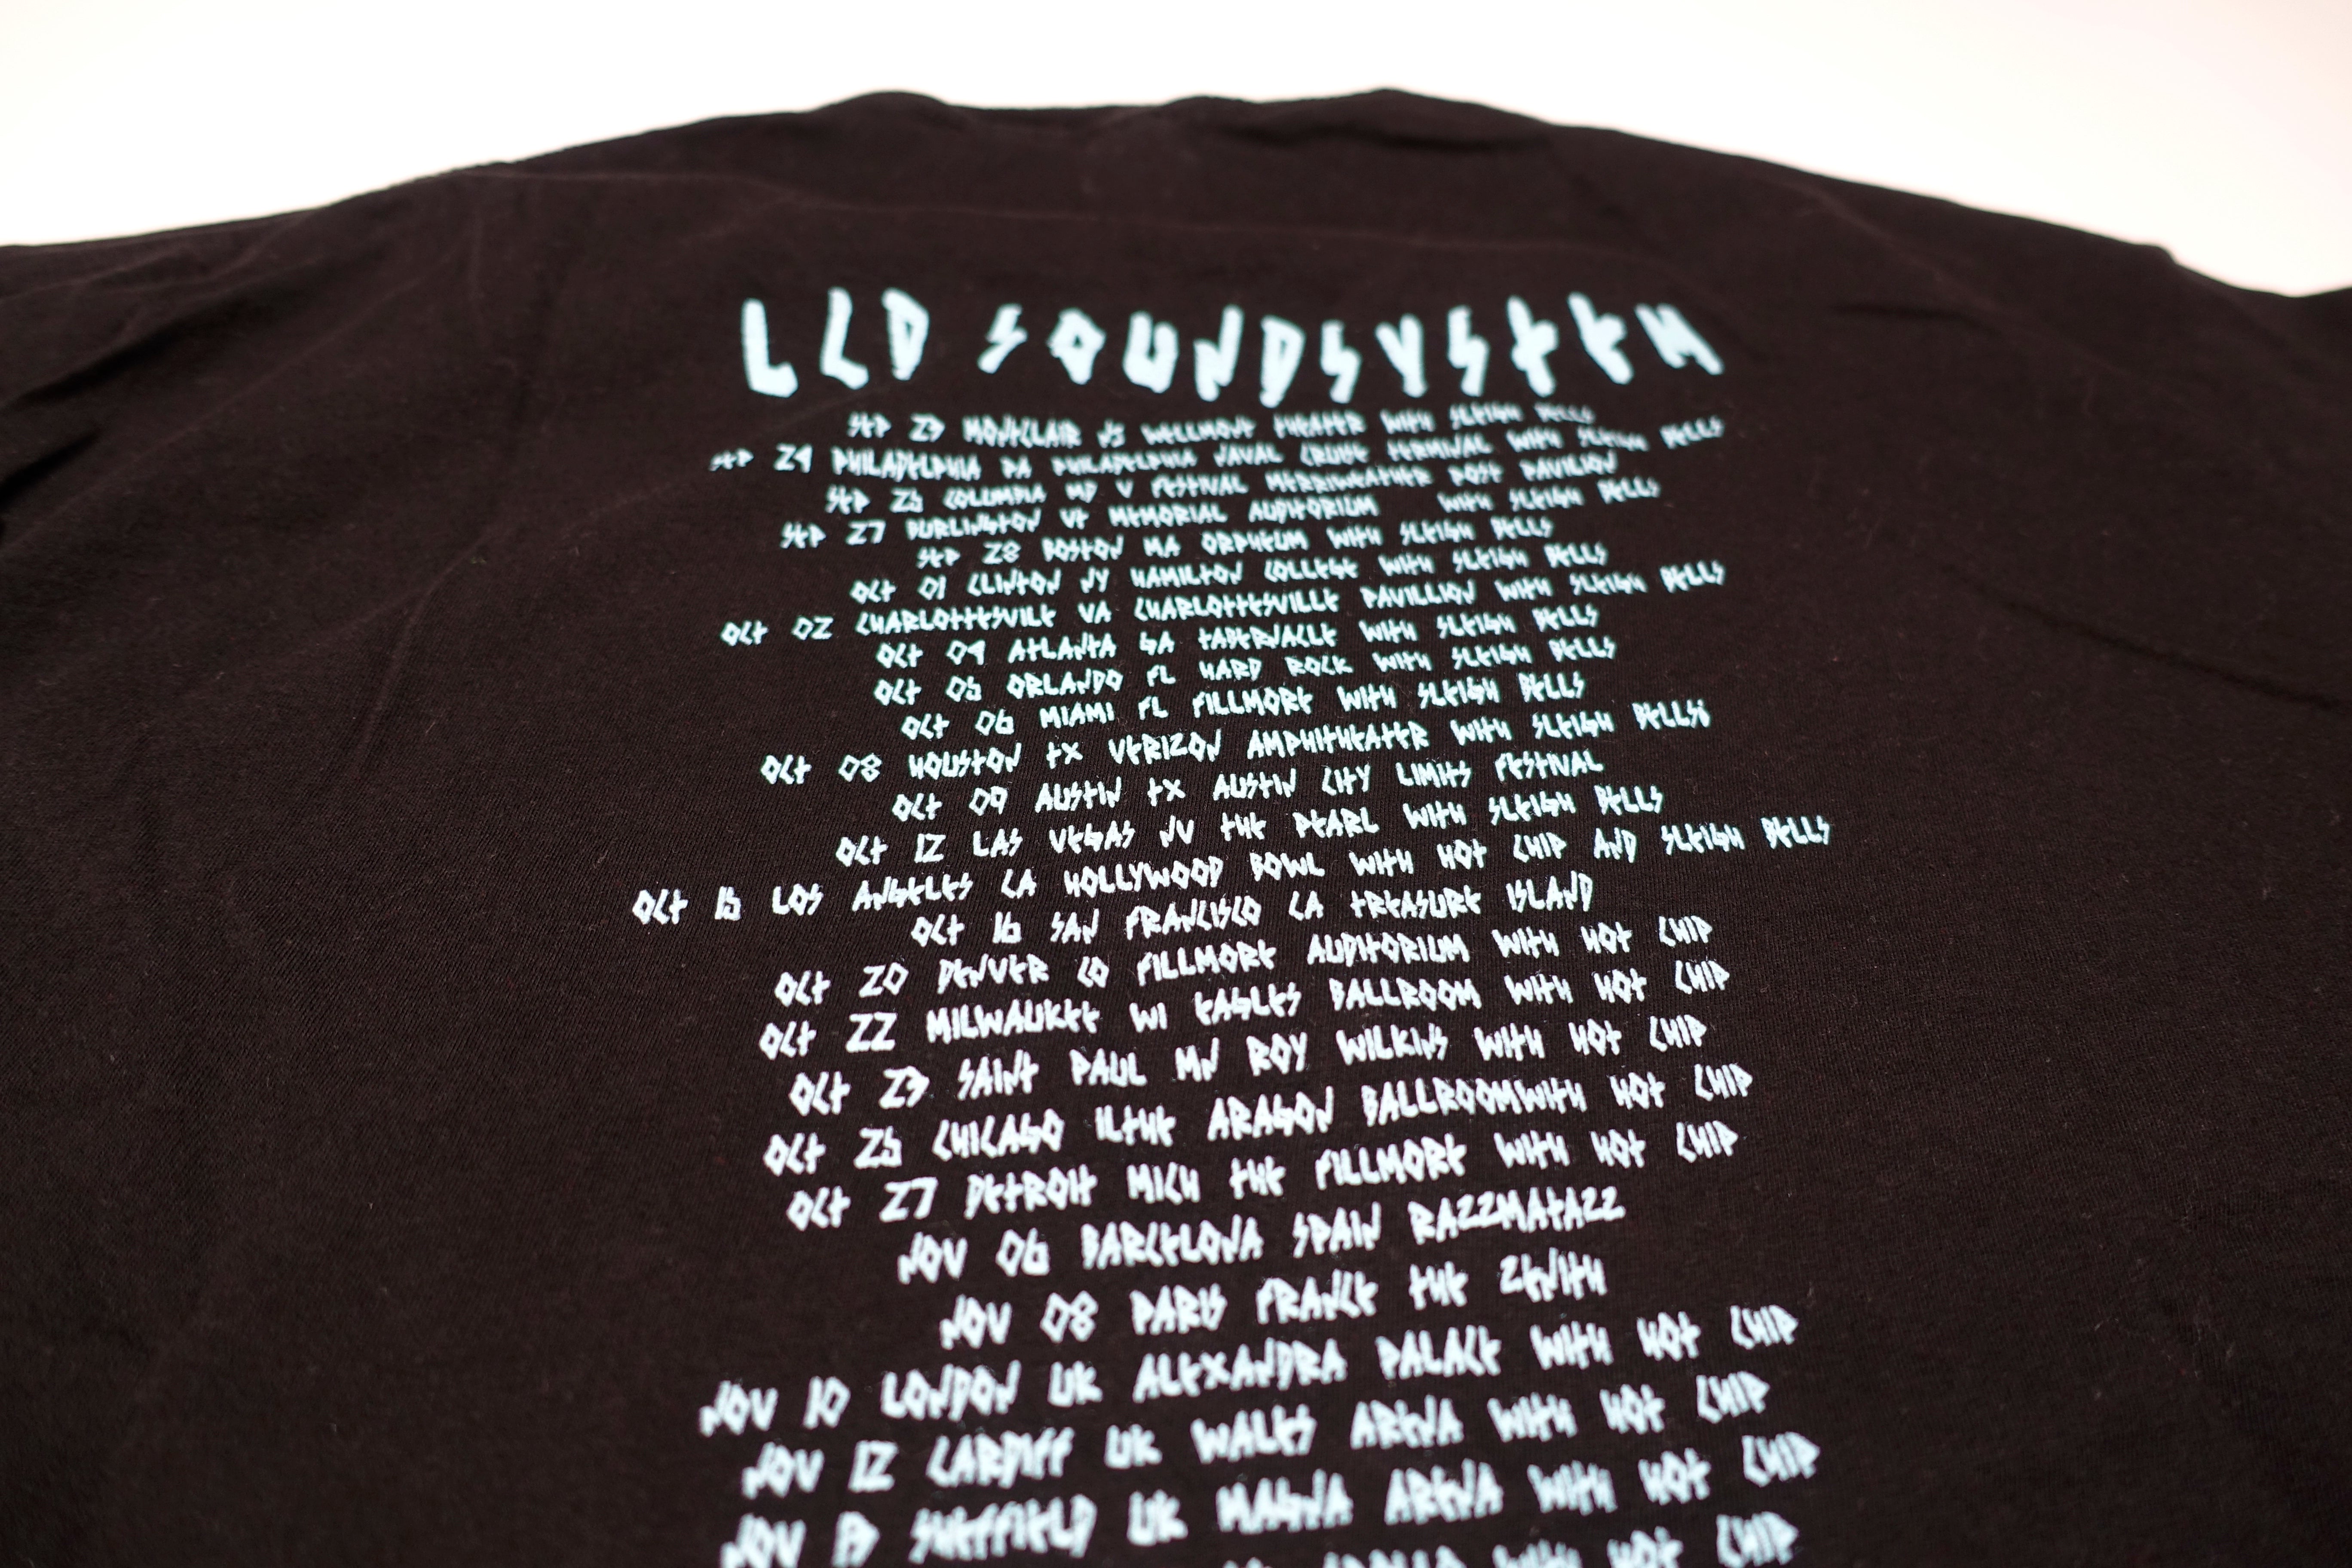 LCD Soundsystem - This Is Happening 2010 Tour Shirt Size Large